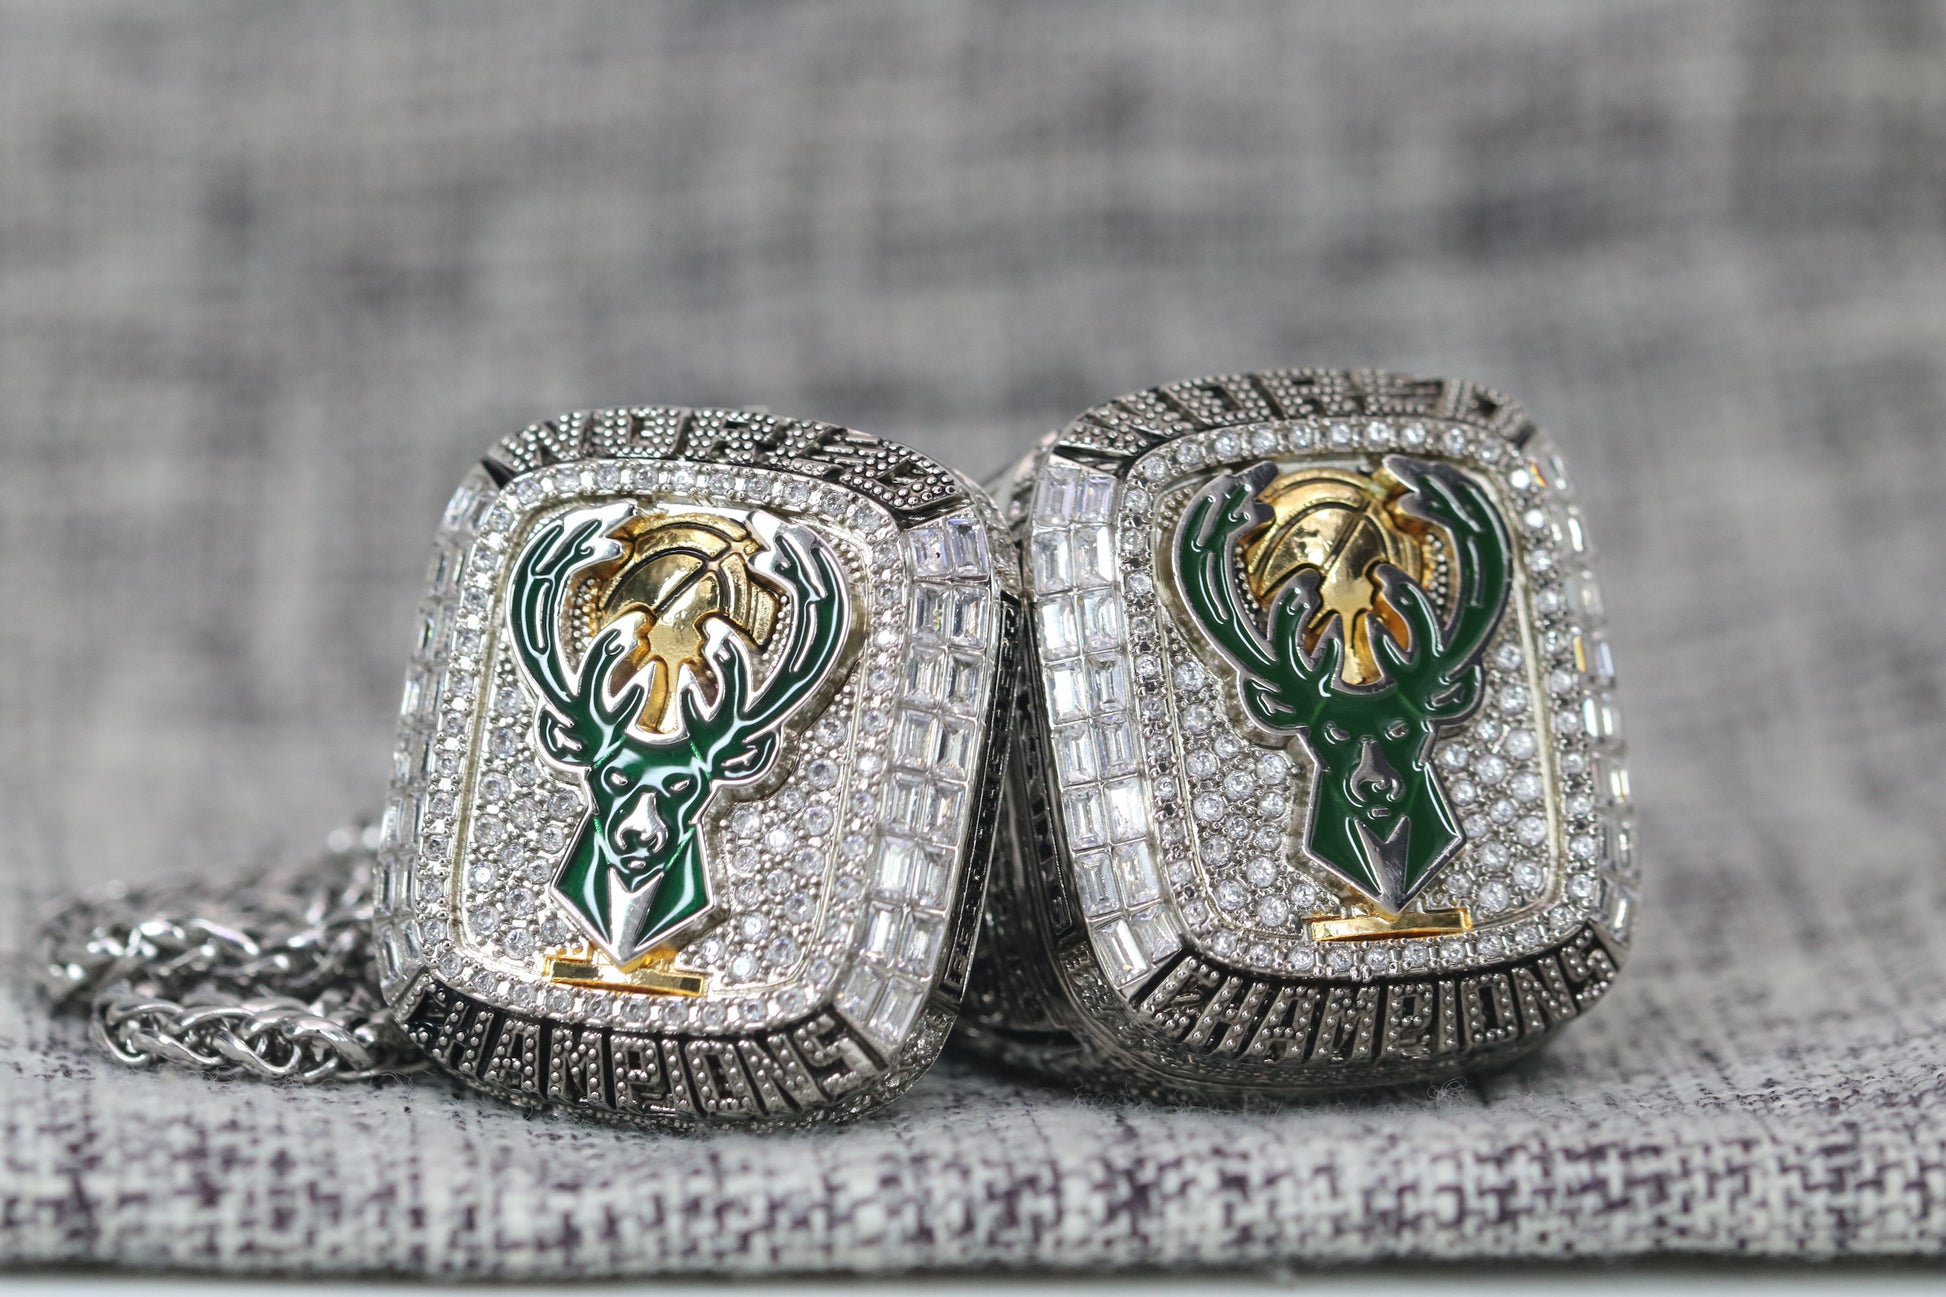 2019 Stanley Cup Series Championship Ring Replica, with Display